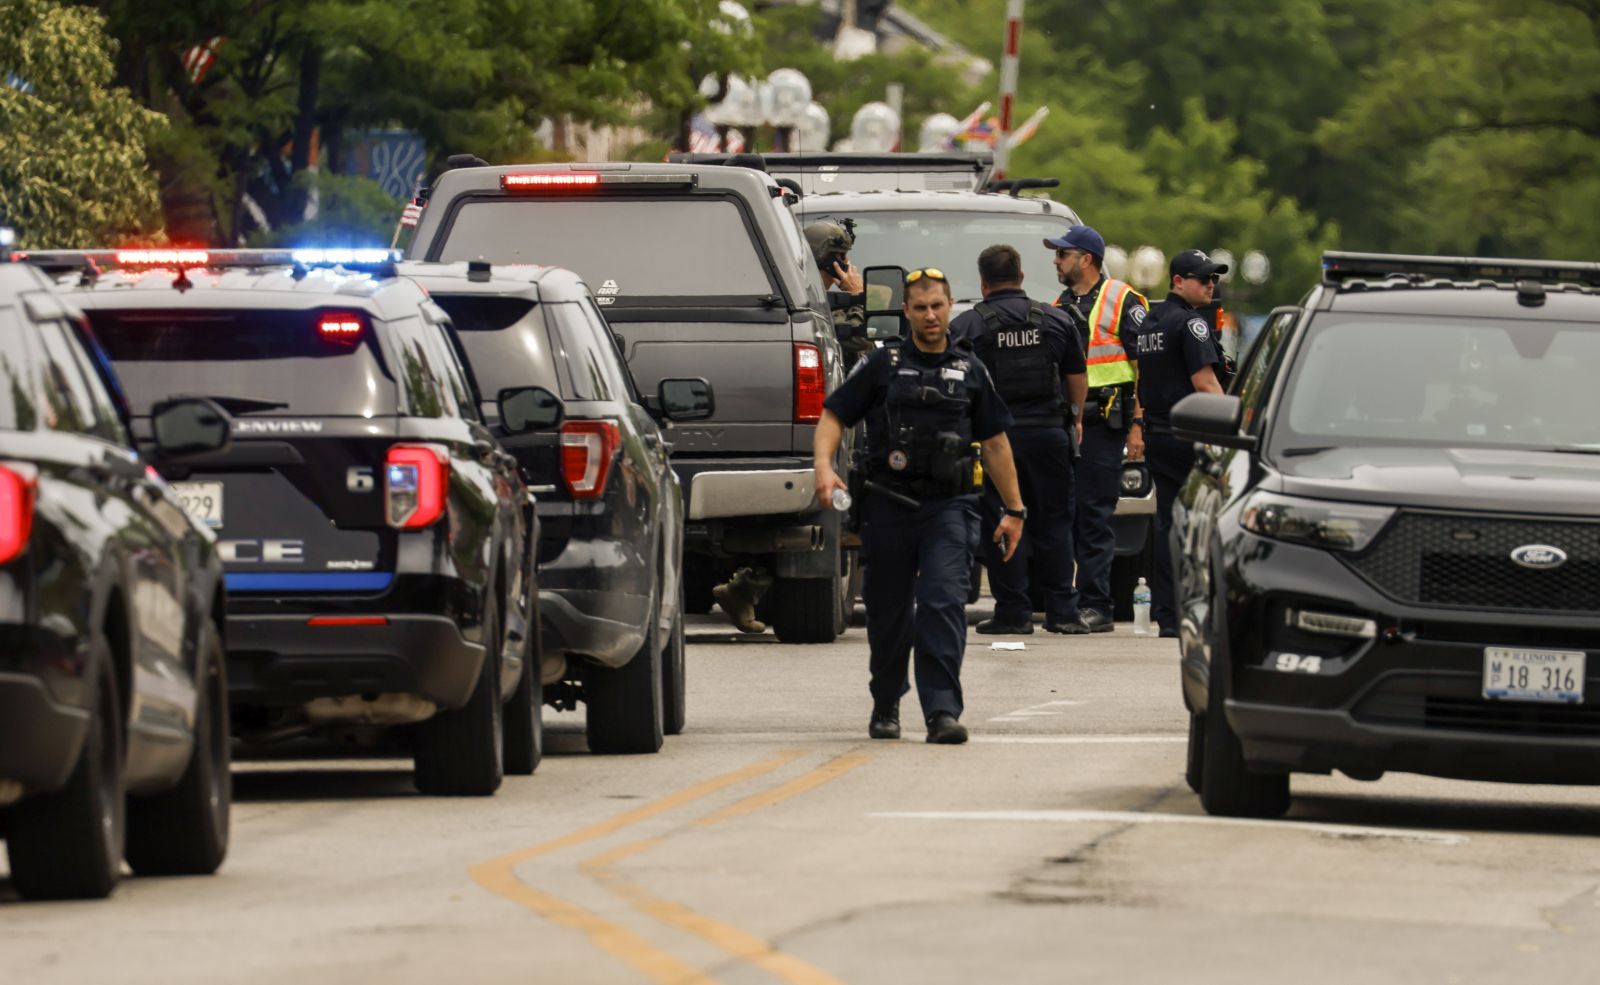 epa10052339 Law enforcement officers investigate the scene of a mass shooting at a 4th of July celebration and parade in Highland Park, Illinois, USA, 04 July 2022. A gunman opened fire as people gathered to watch a Fourth of July parade in Highland Park, Illinois, killing at least six people and injuring dozens.  EPA/TANNEN MAURY